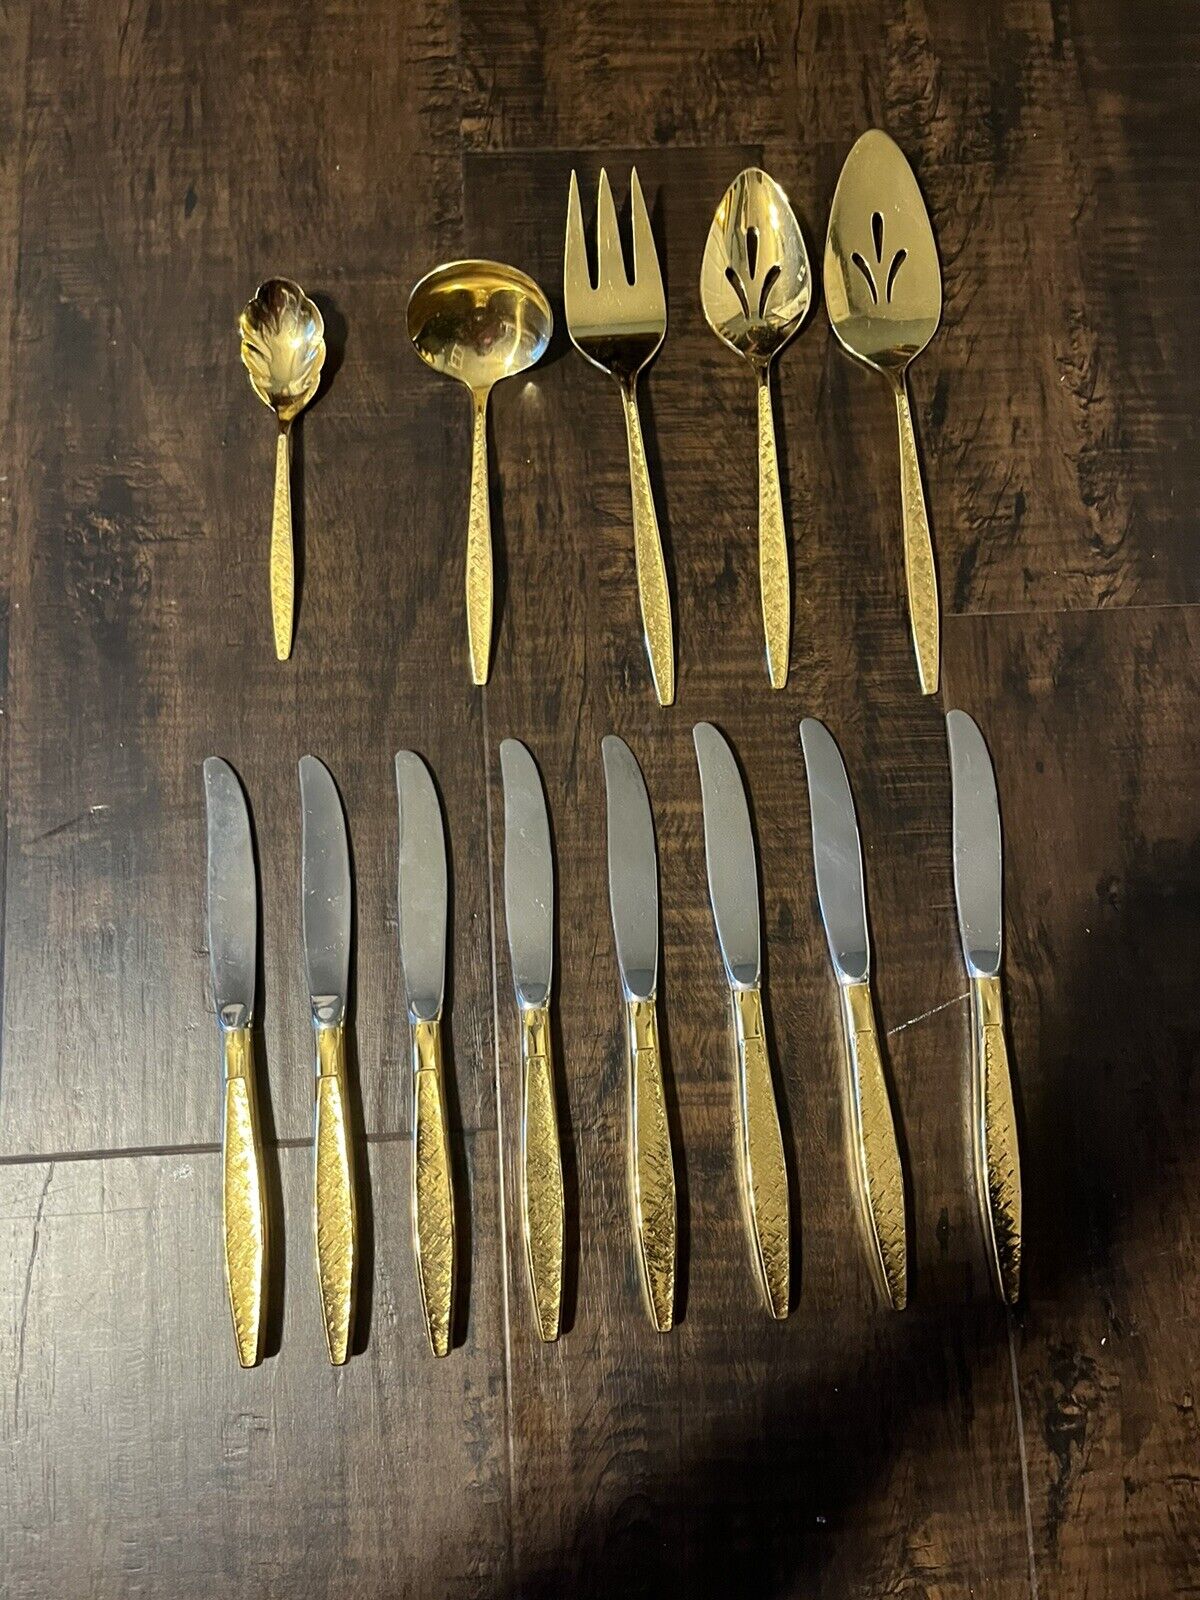 1847 rogers bros silverware gold Plated